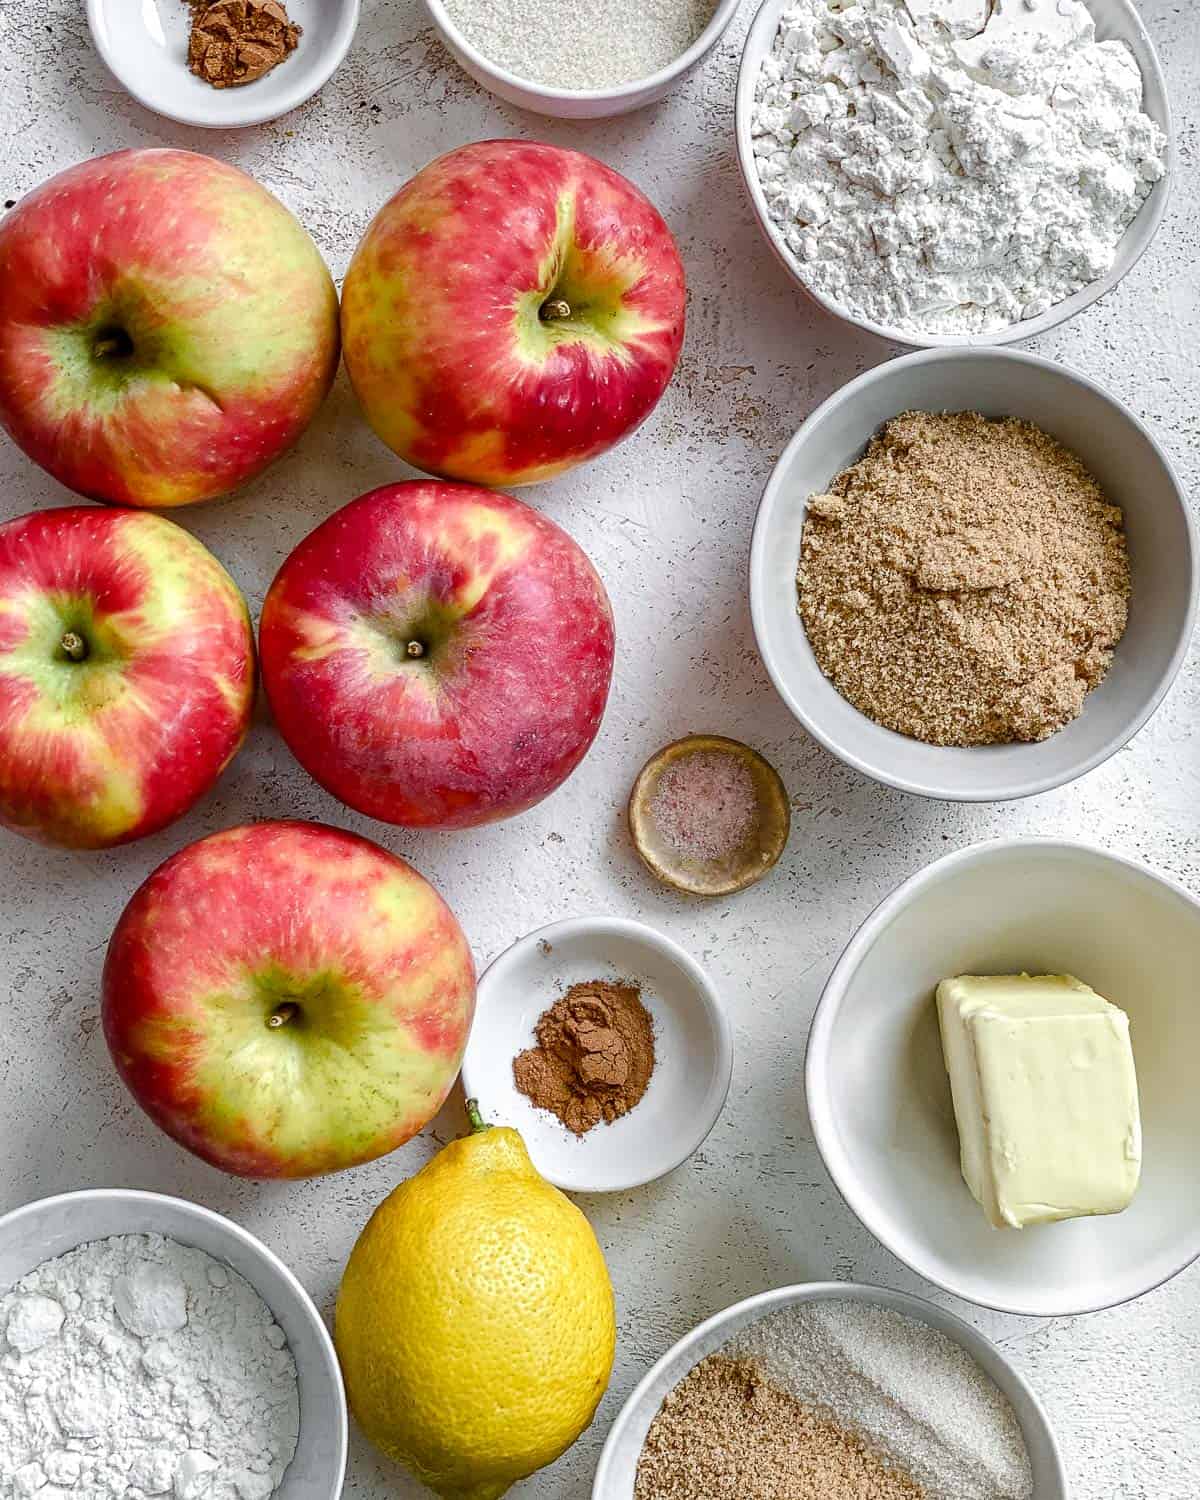 ingredients for The Best Vegan Apple Crumble measured out against a white surface